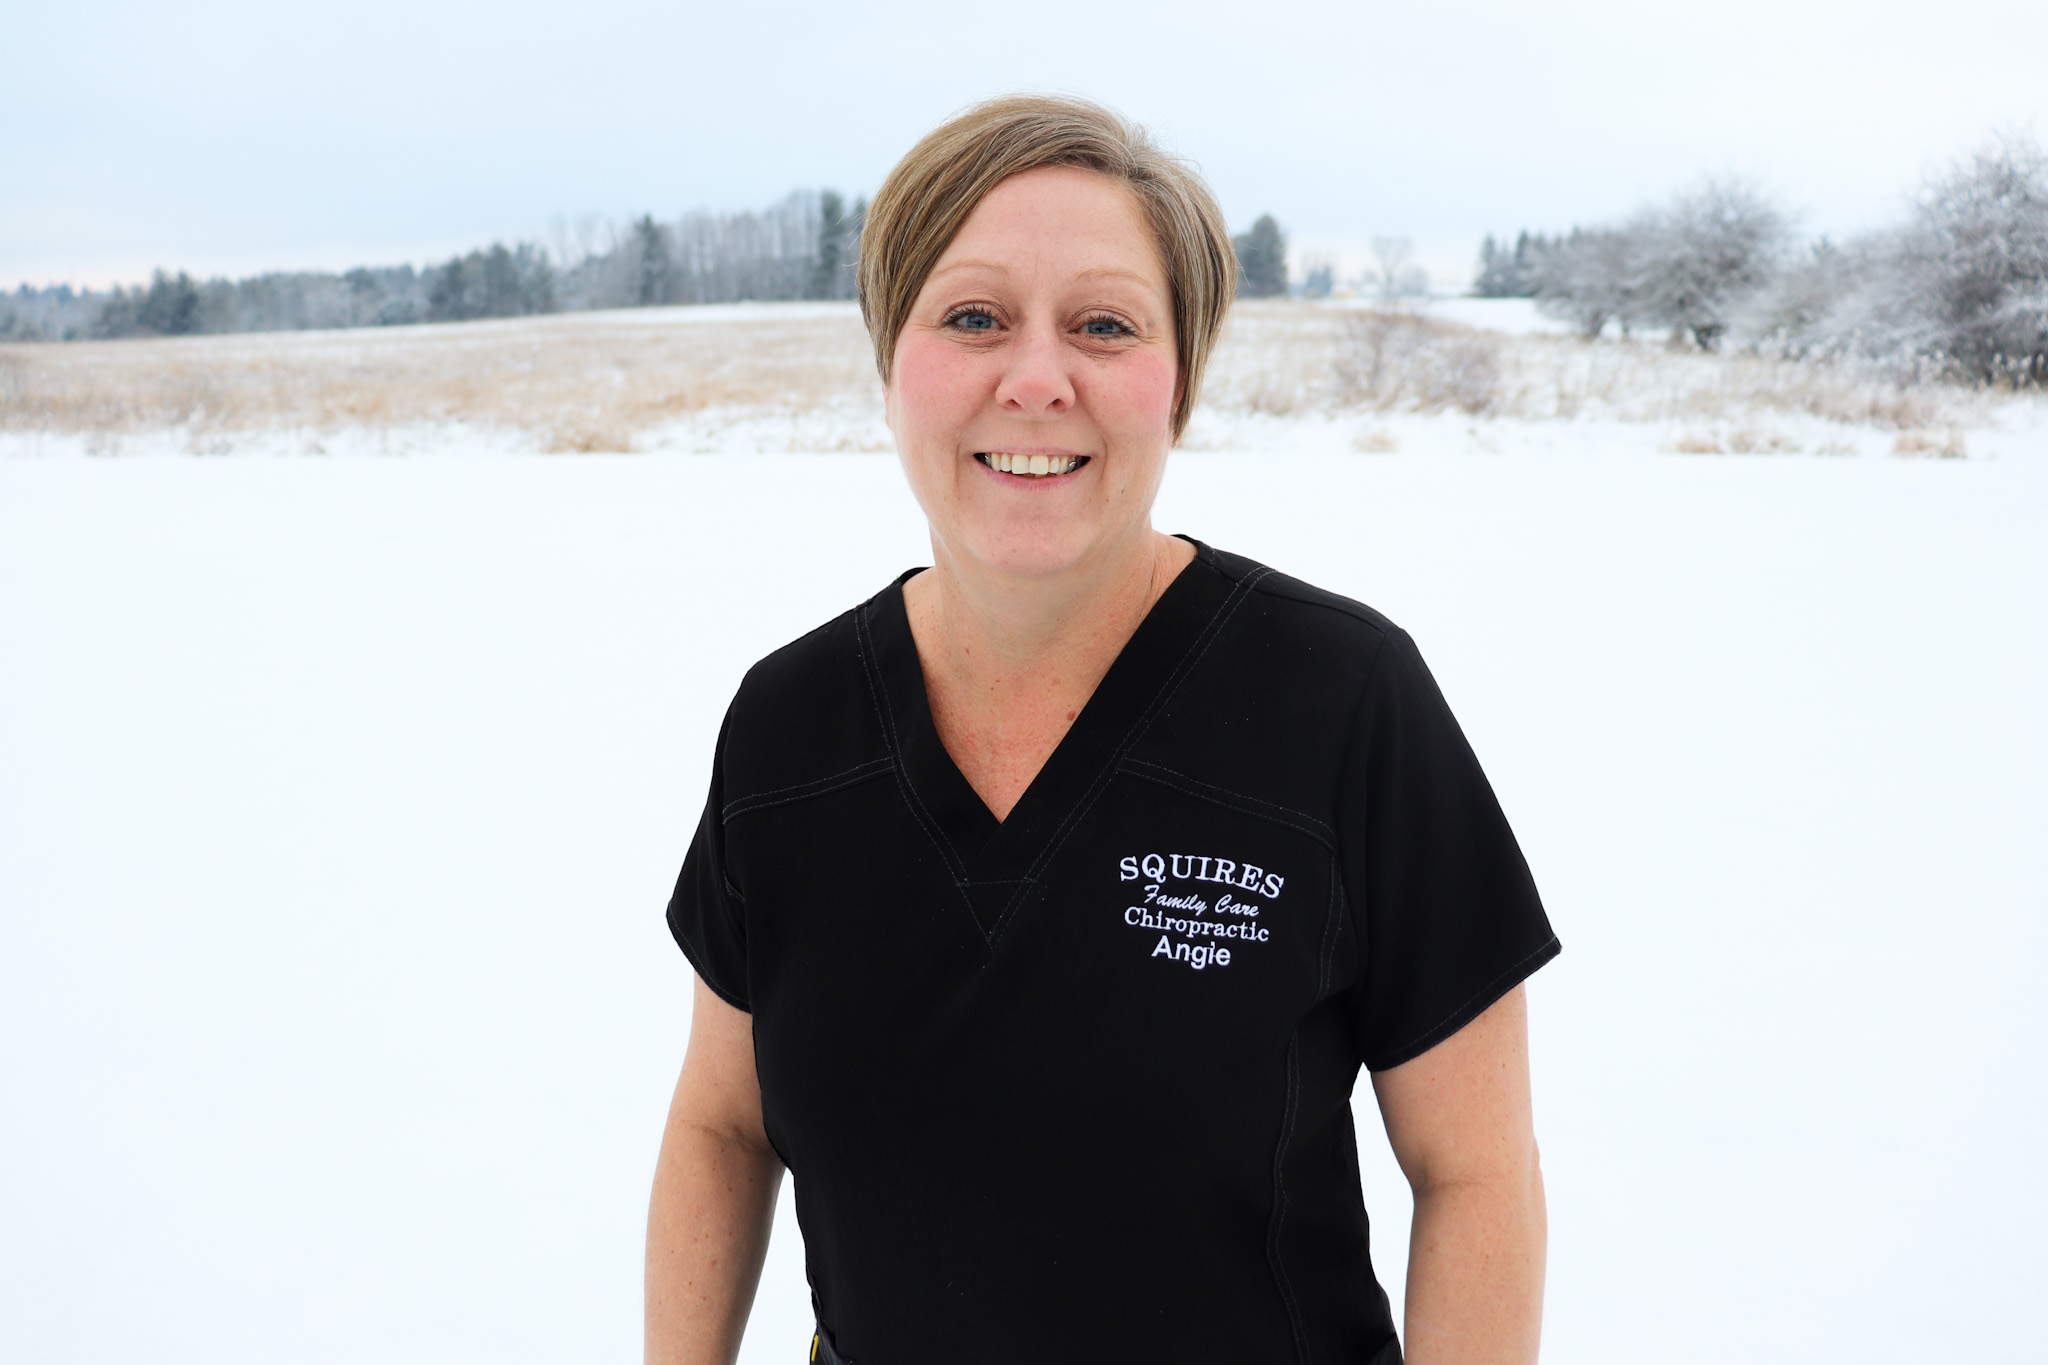 Angie from Squires Chiropractic - Scottville, Michigan